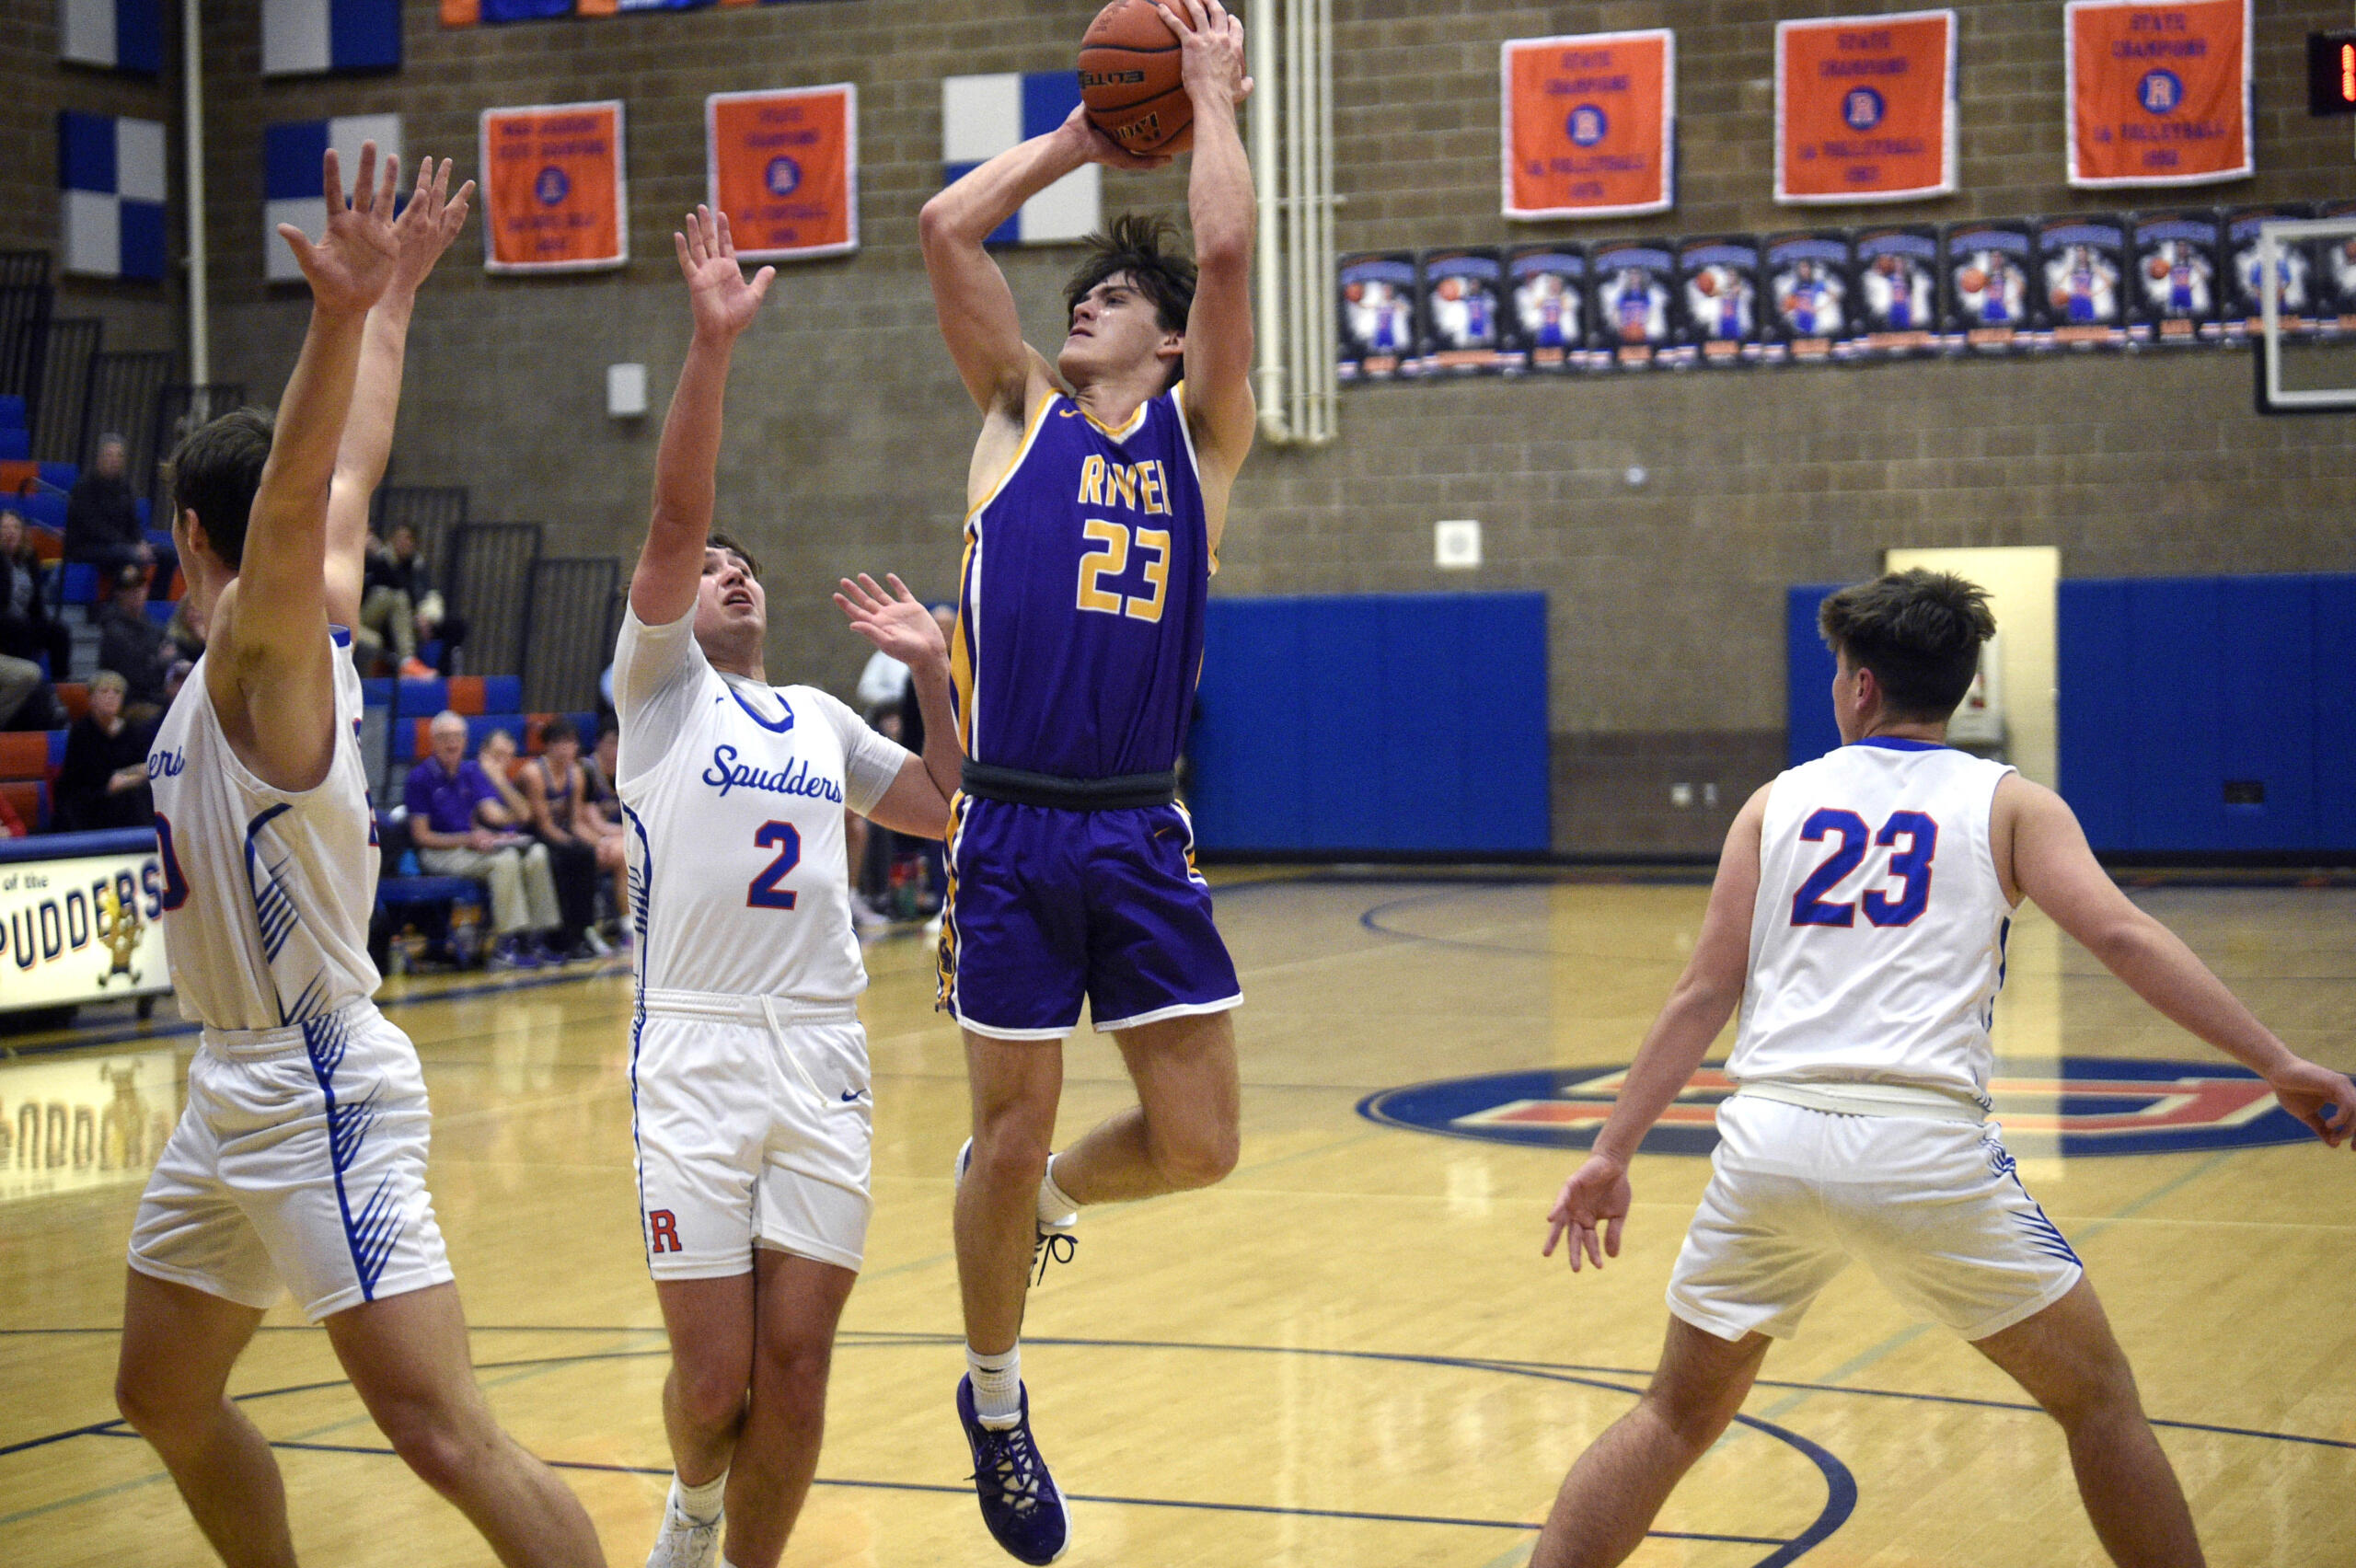 Columbia River’s Aaron Hoey (23) shoots over Ridgefield’s Colton Warren (2) during a 2A GSHL boys basketball game on Thursday, Jan. 4, 2024, at Ridgefield High School.